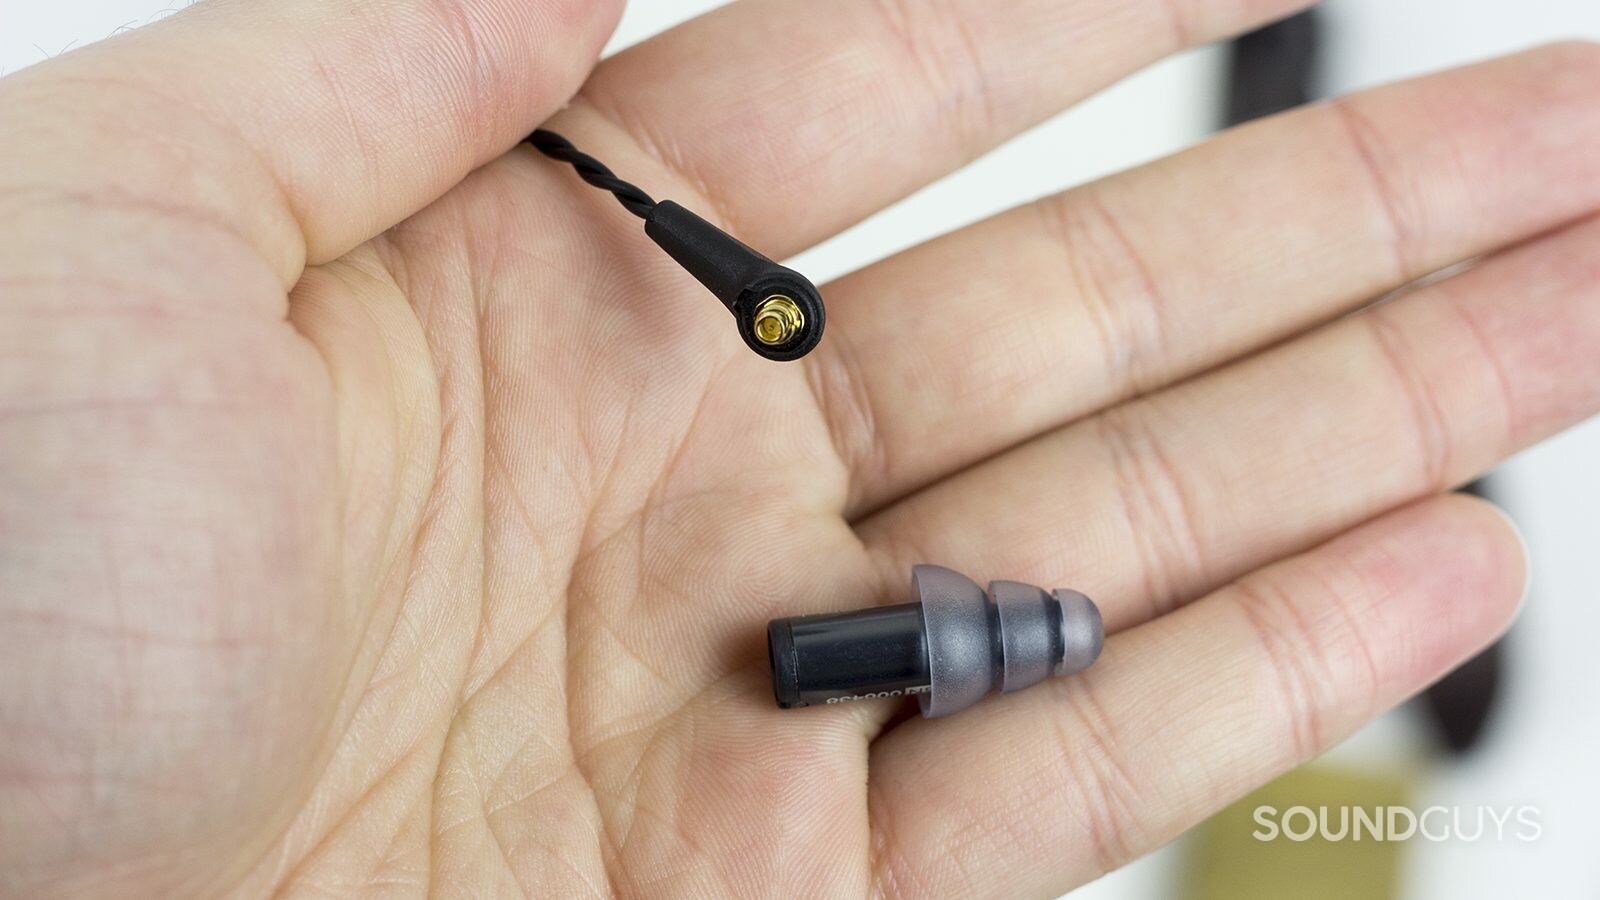 Wired or wireless earphones – which design is best? - Domus